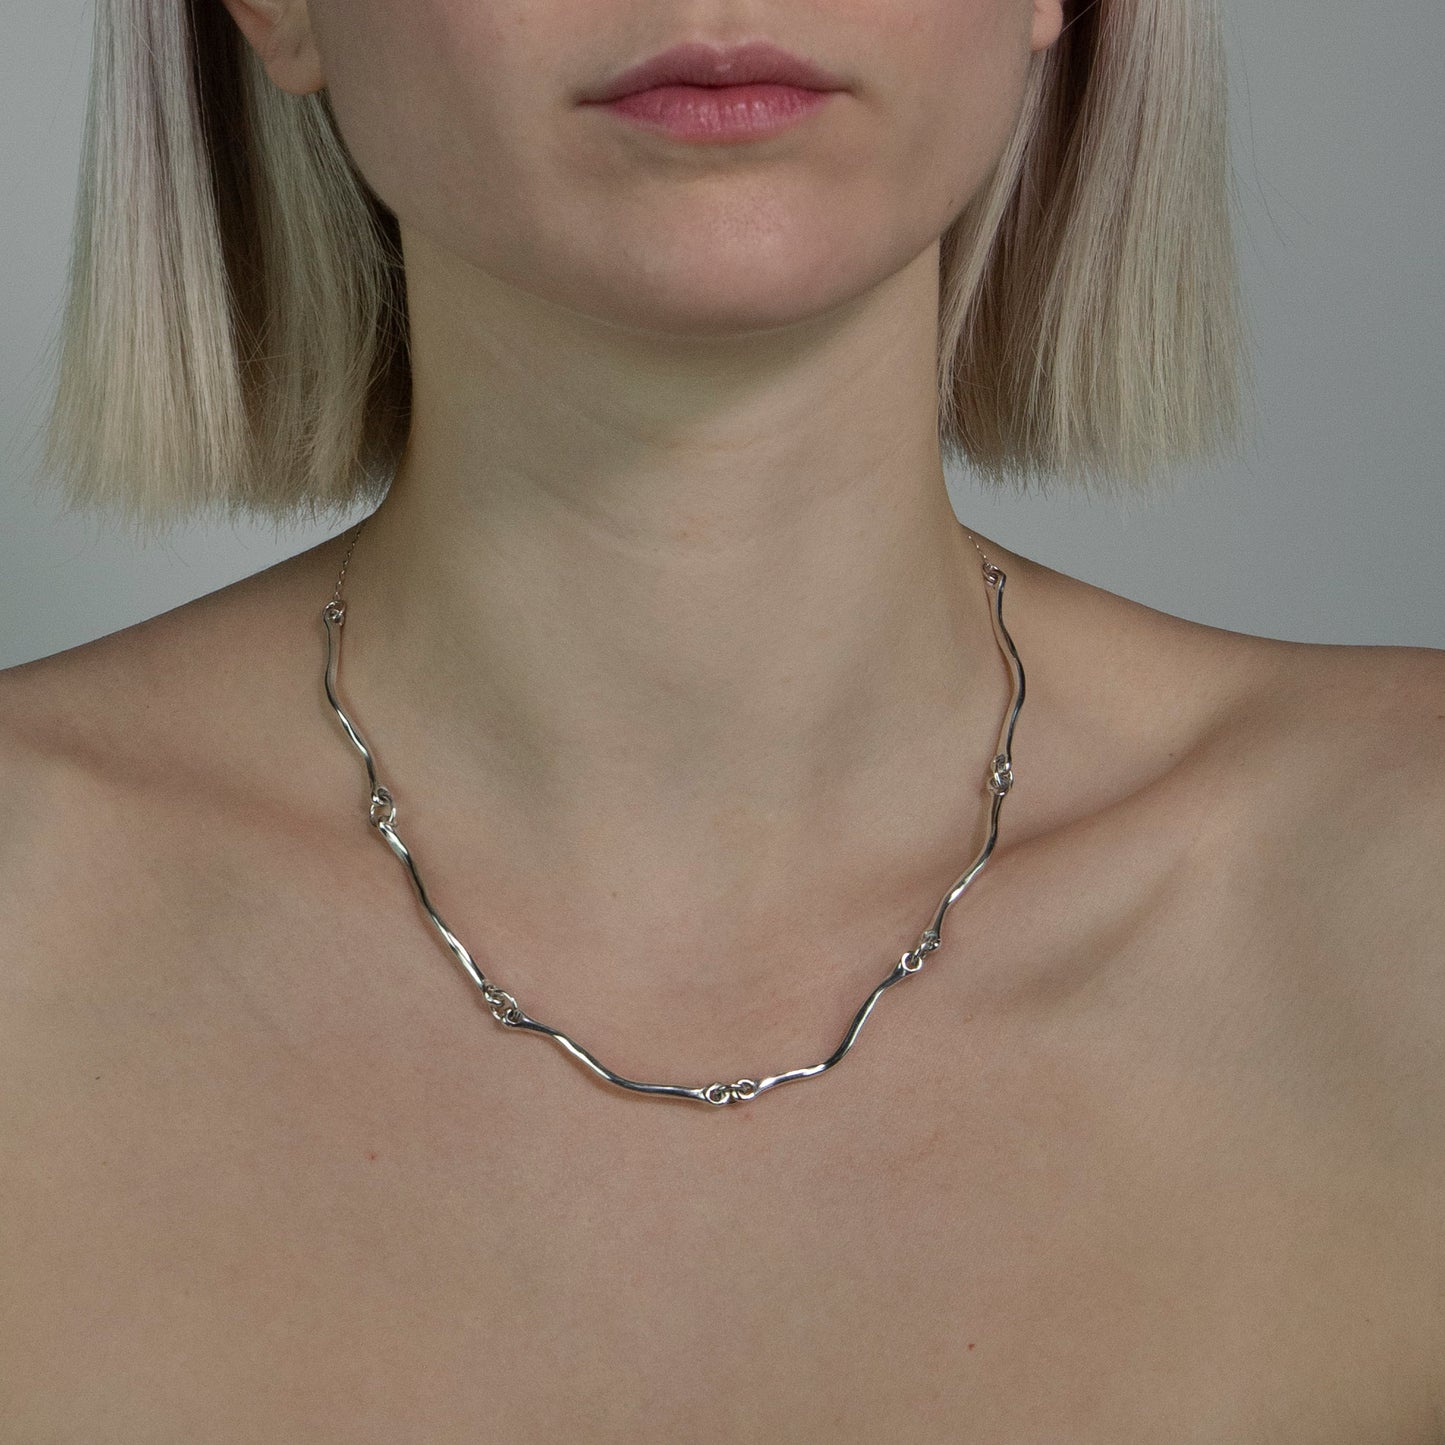 The Rogrande necklace is handmade and made of 925 sterling silver. It features small delicate wavy elements connected by rings, creating a smooth and shiny surface